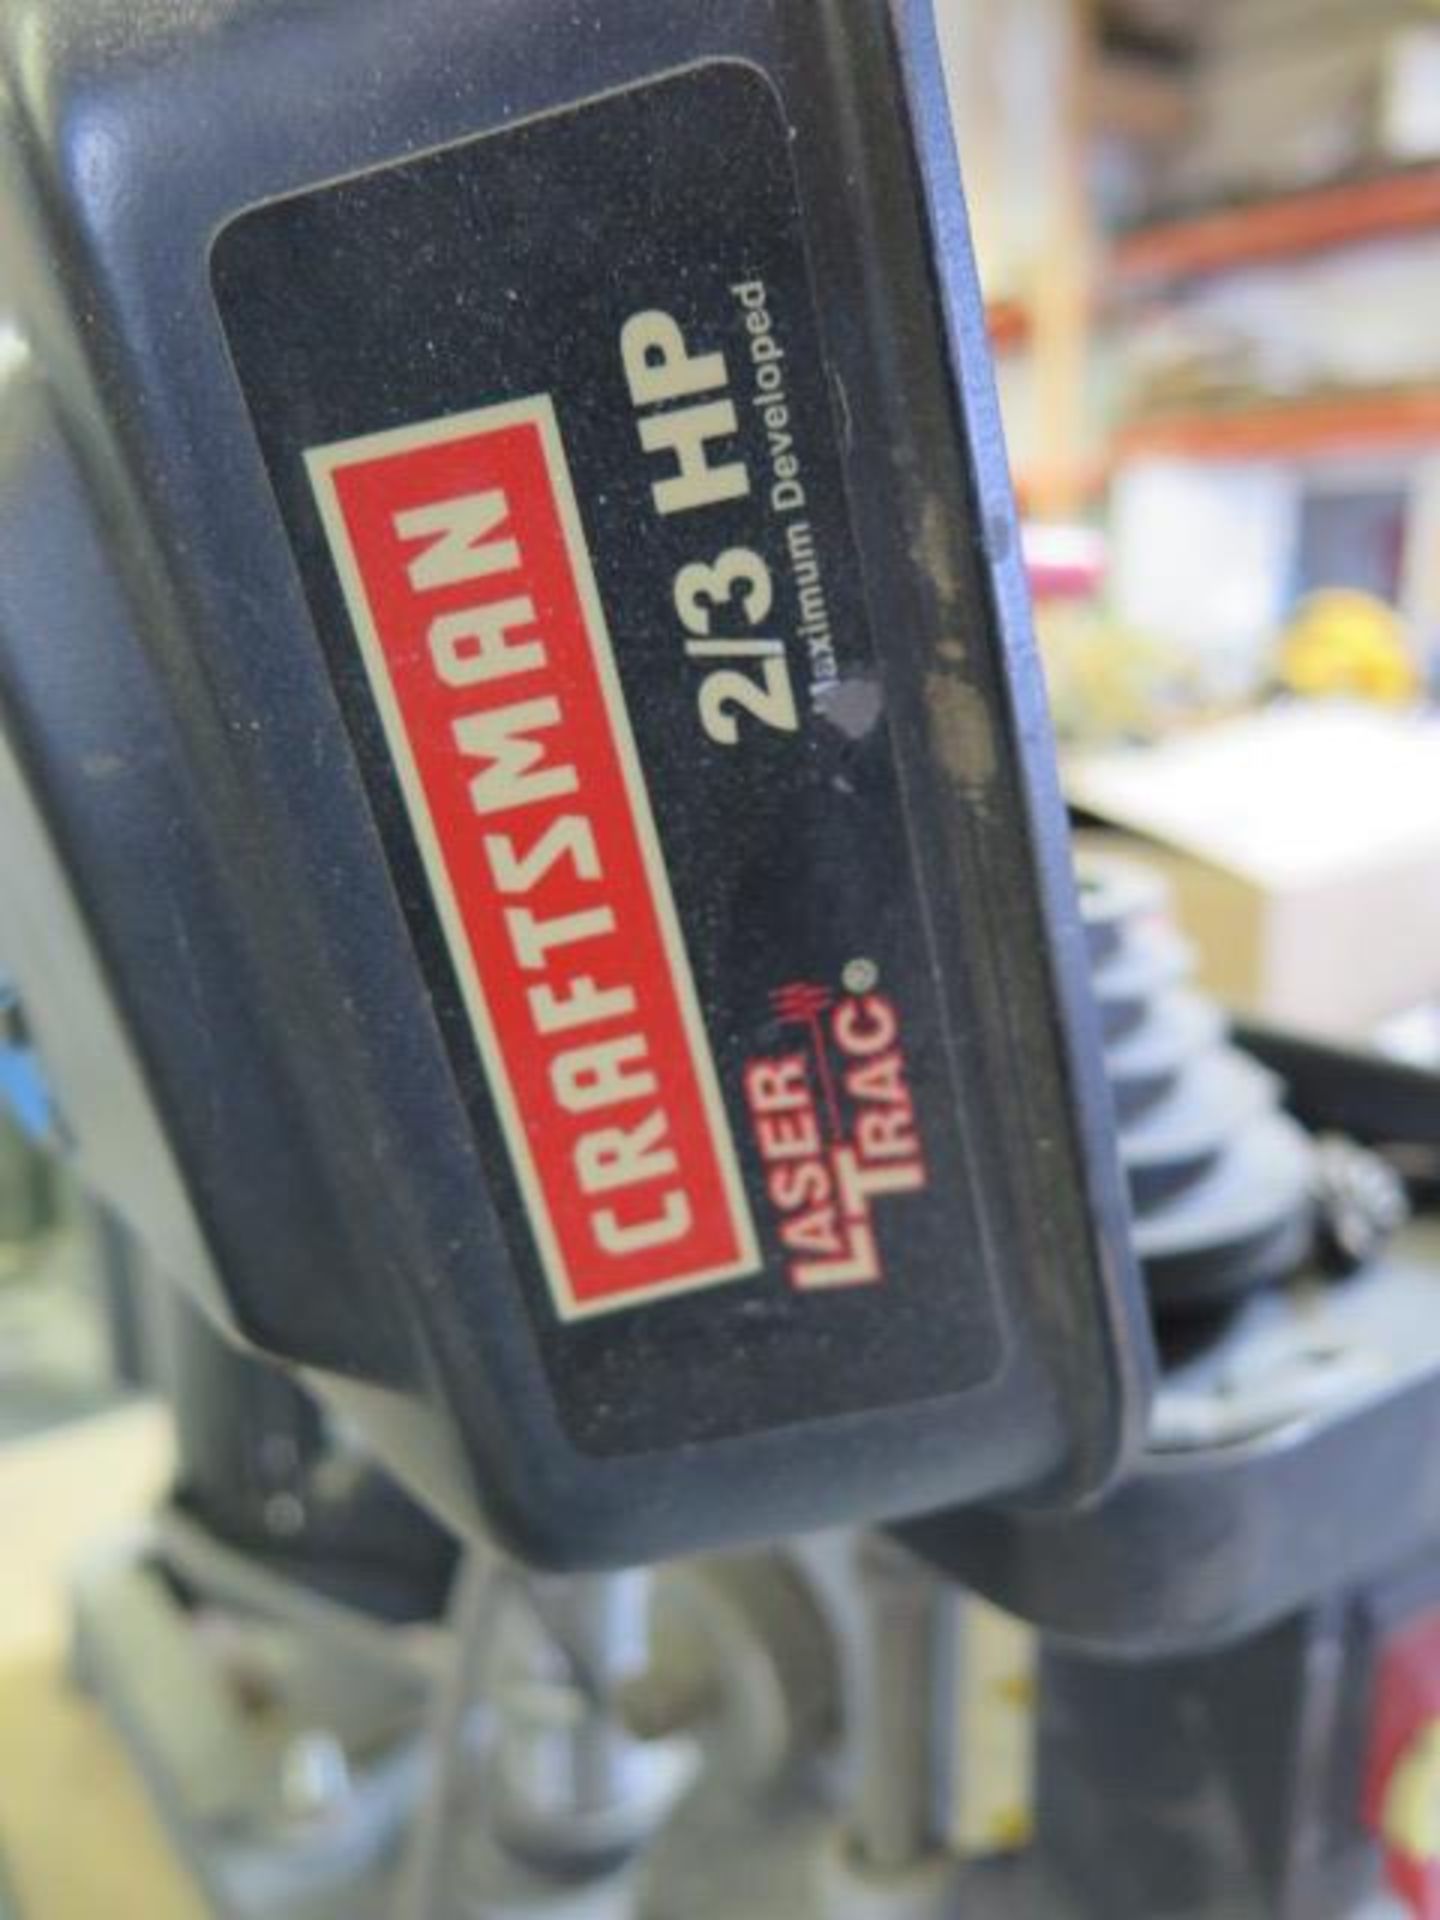 Craftsman Table Model Drill Press w/ Laser Trac, 2/3Hp Motor (SOLD AS-IS - NO WARRANTY) - Image 3 of 5